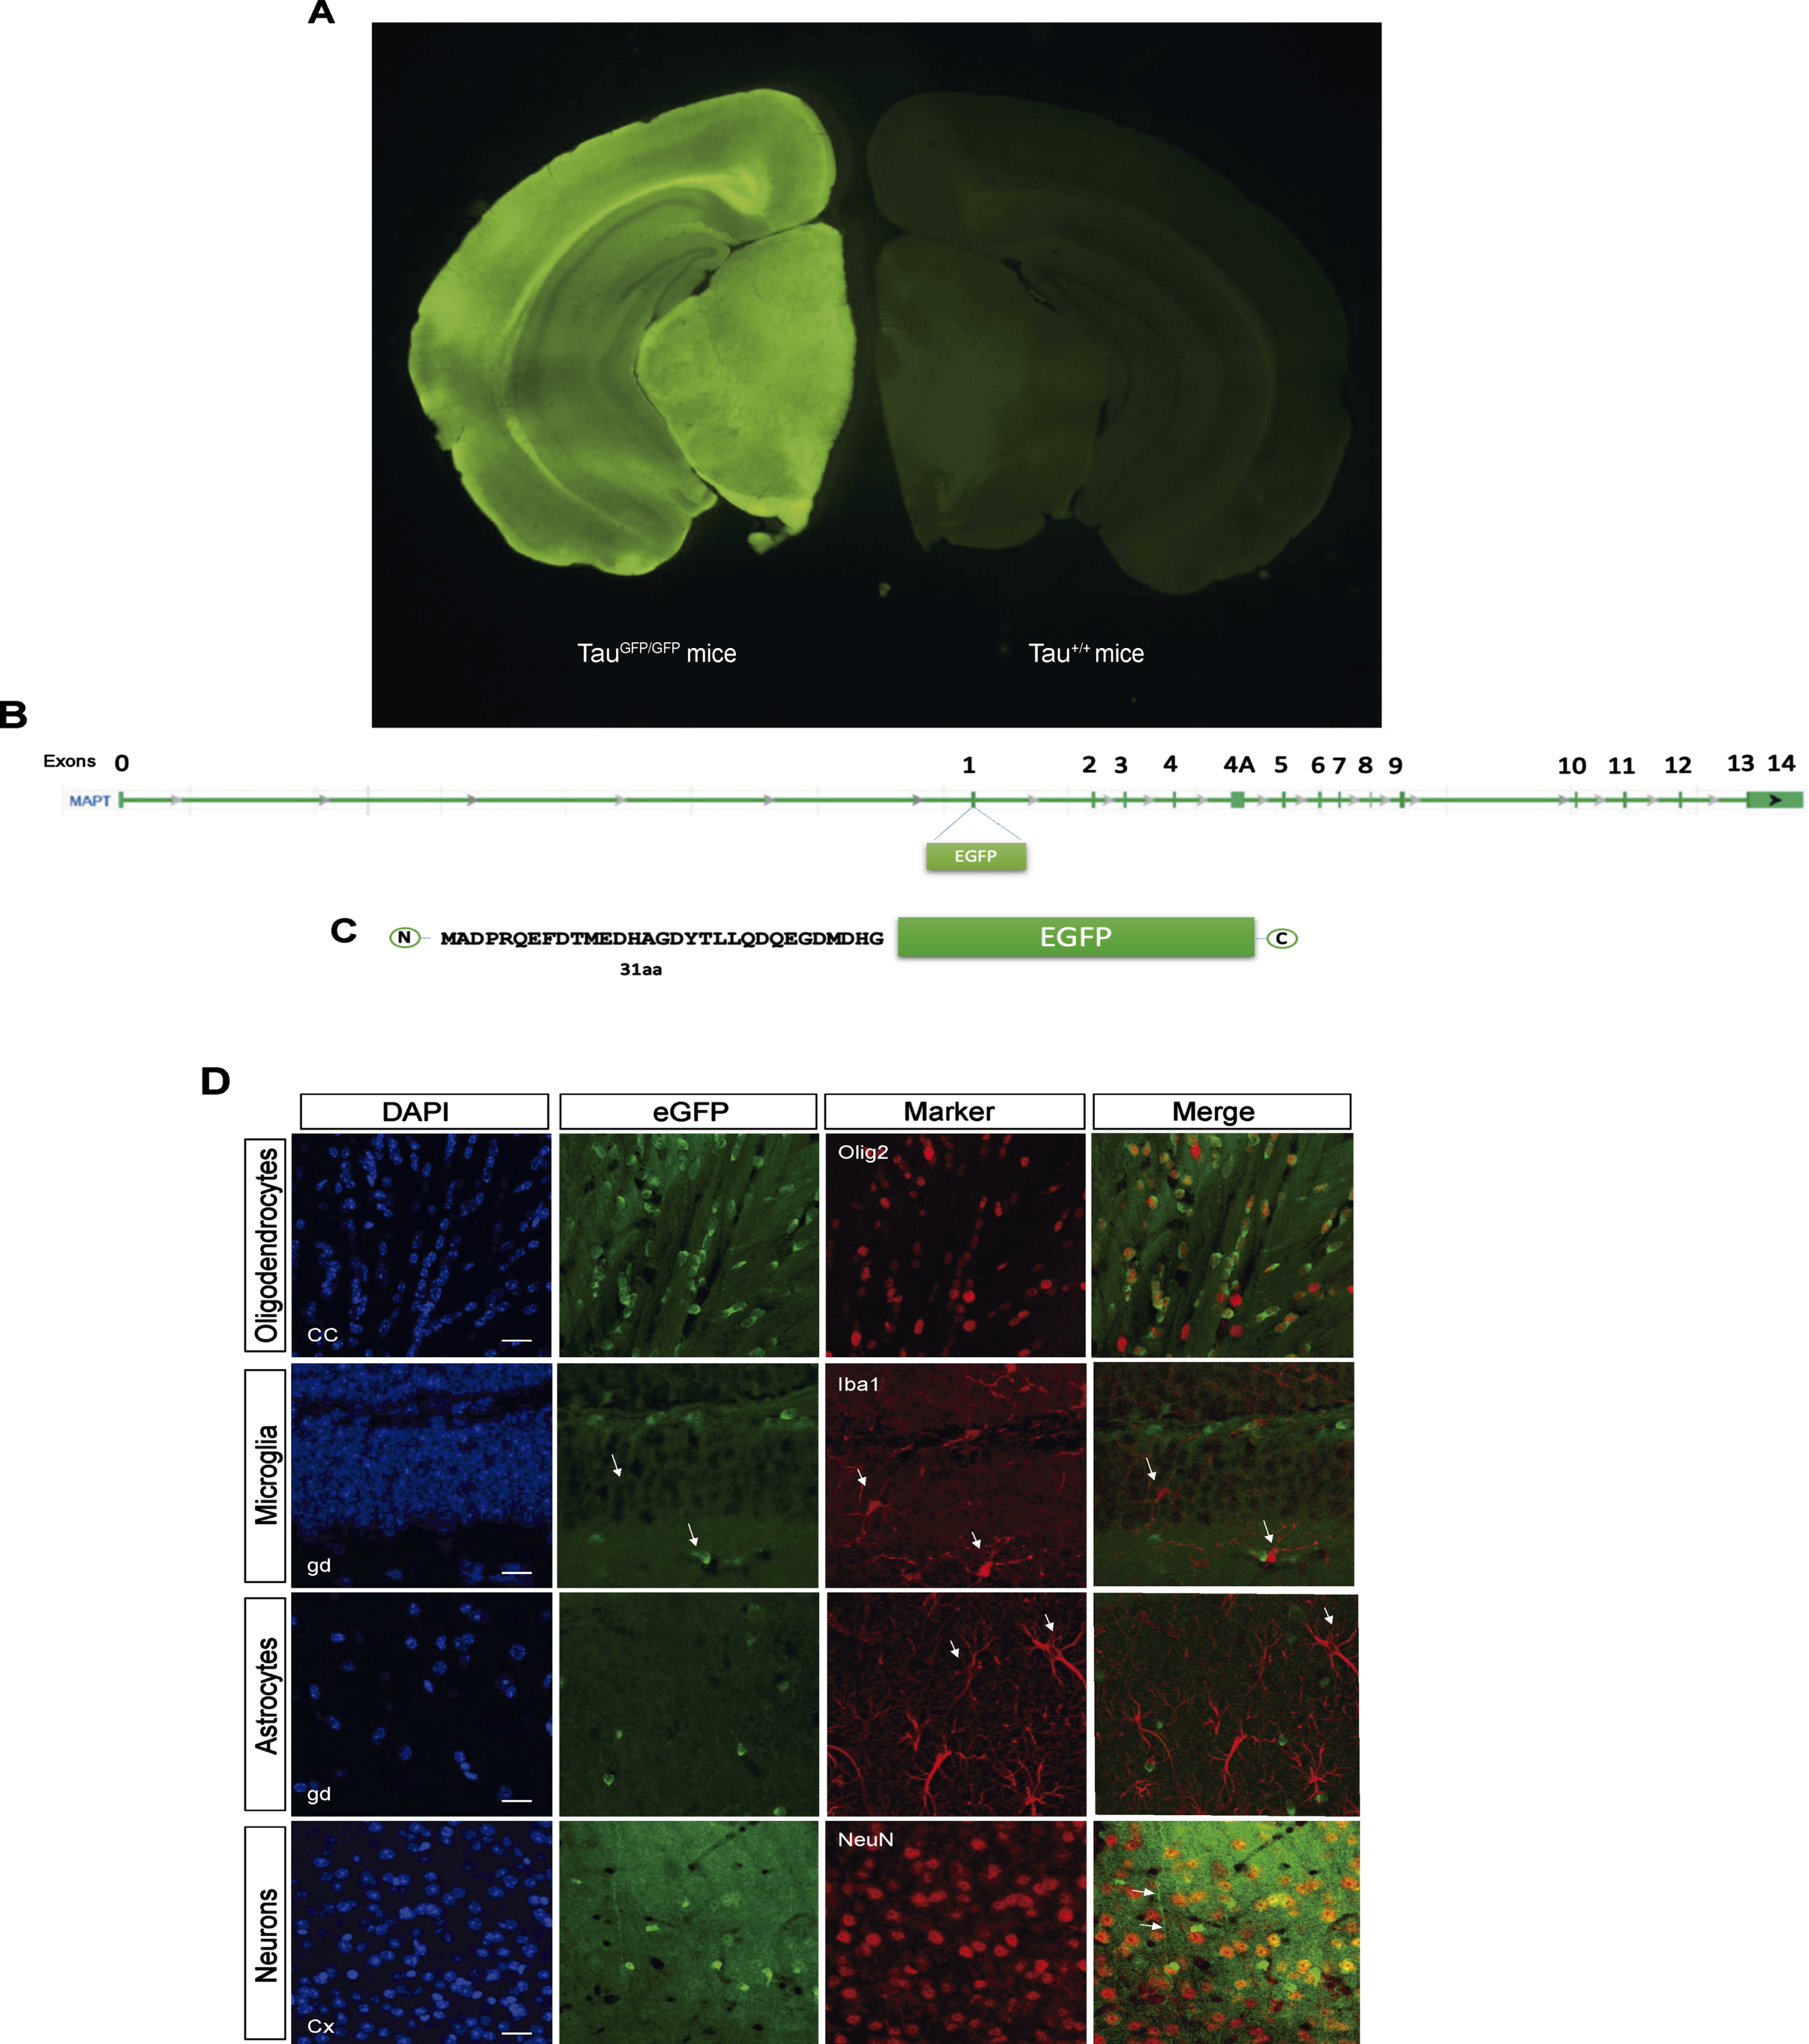 B6.129S4(Cg)-Mapttm1(eGFP)Klt/J Mice (TauGFP/GFP mice). A) Fluorescence loupe image of a brain coronal section in a TauGFP/GFP and Tau+/+ (wild type) mice. B) Gene Mapt schematic with GFP insertion in the first exon and (C) scheme of the resulting protein with the first 31 amino acids of tau protein followed by cytoplasmic eGFP protein that is expressed under the endogenous tau promoter. D) Representative fluorescence confocal microscopy images with different markers of glial cells as Olig2 (oligodendrocytes), Iba1 (microglia), GFAP (astrocytes), and NeuN (neurons) and their colocalization with the endogenous signal in TauGFP/GFP mice. Scale bar 10μm.